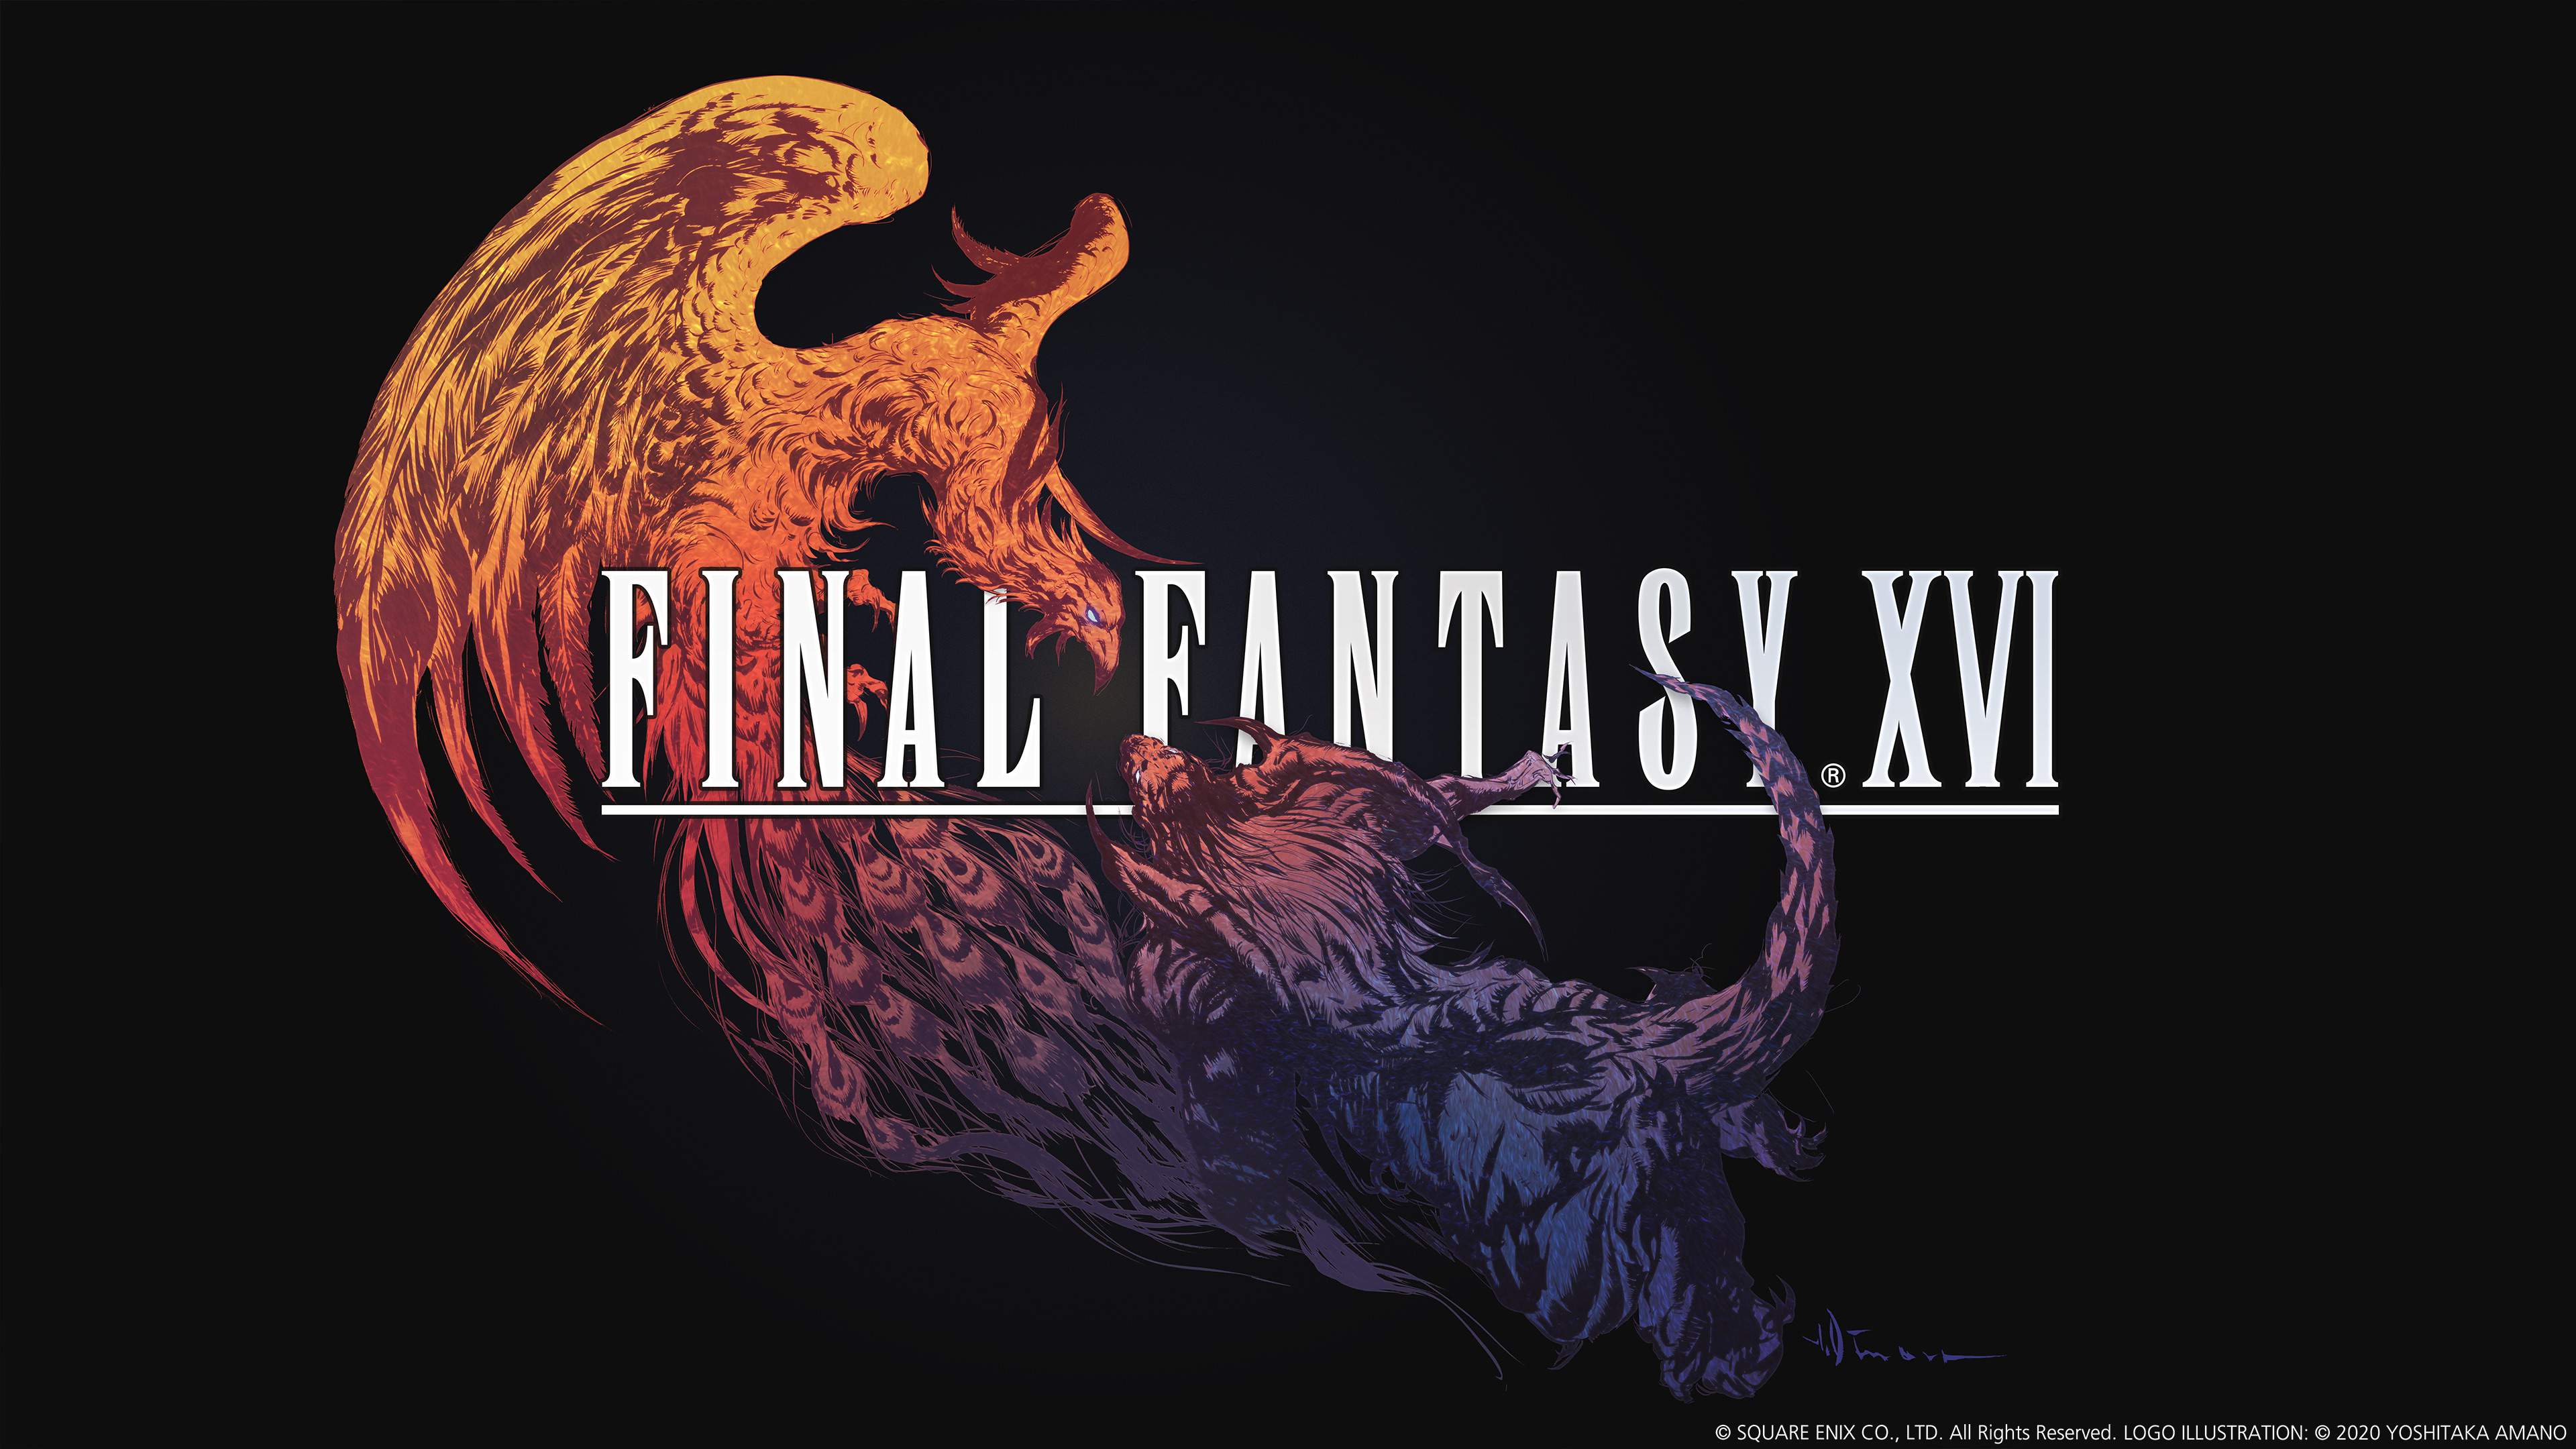 New FINAL FANTASY XVI trailer… and new characters revealed!